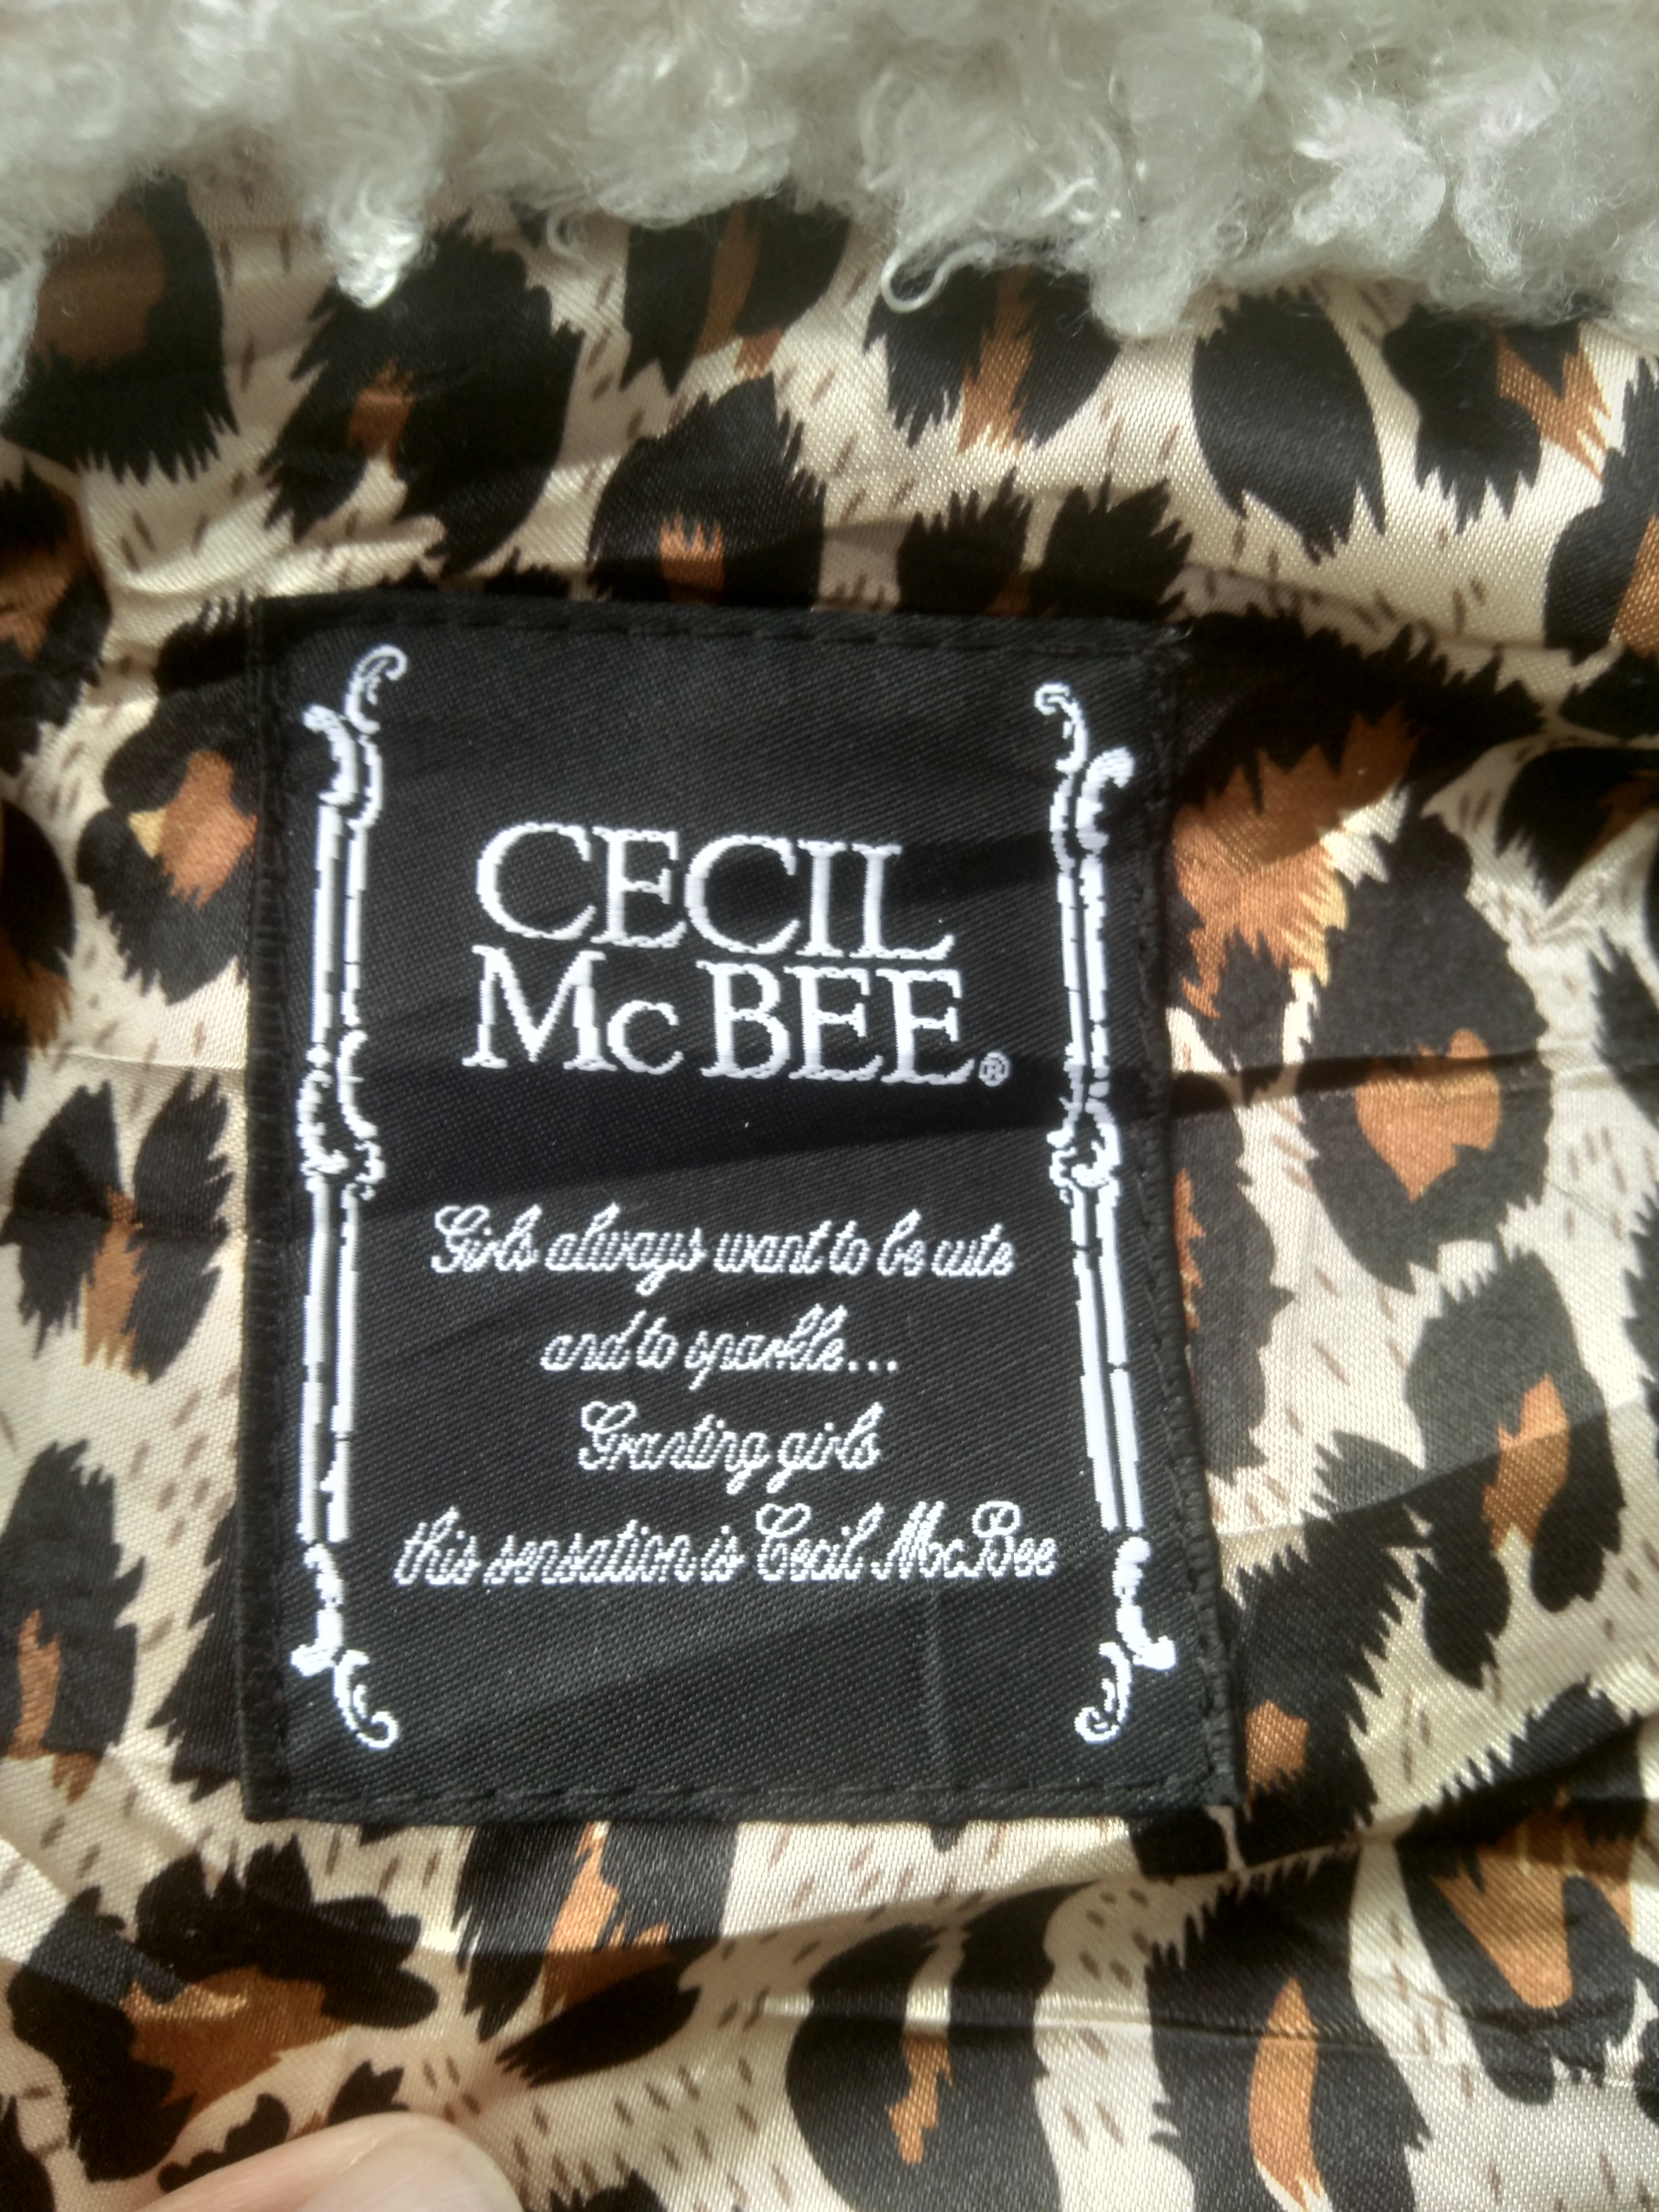 REVERSIBLE Other | | designercloset Designer HOODIE OUTFIT - MCBEE Designers CECIL JACKET WINTER